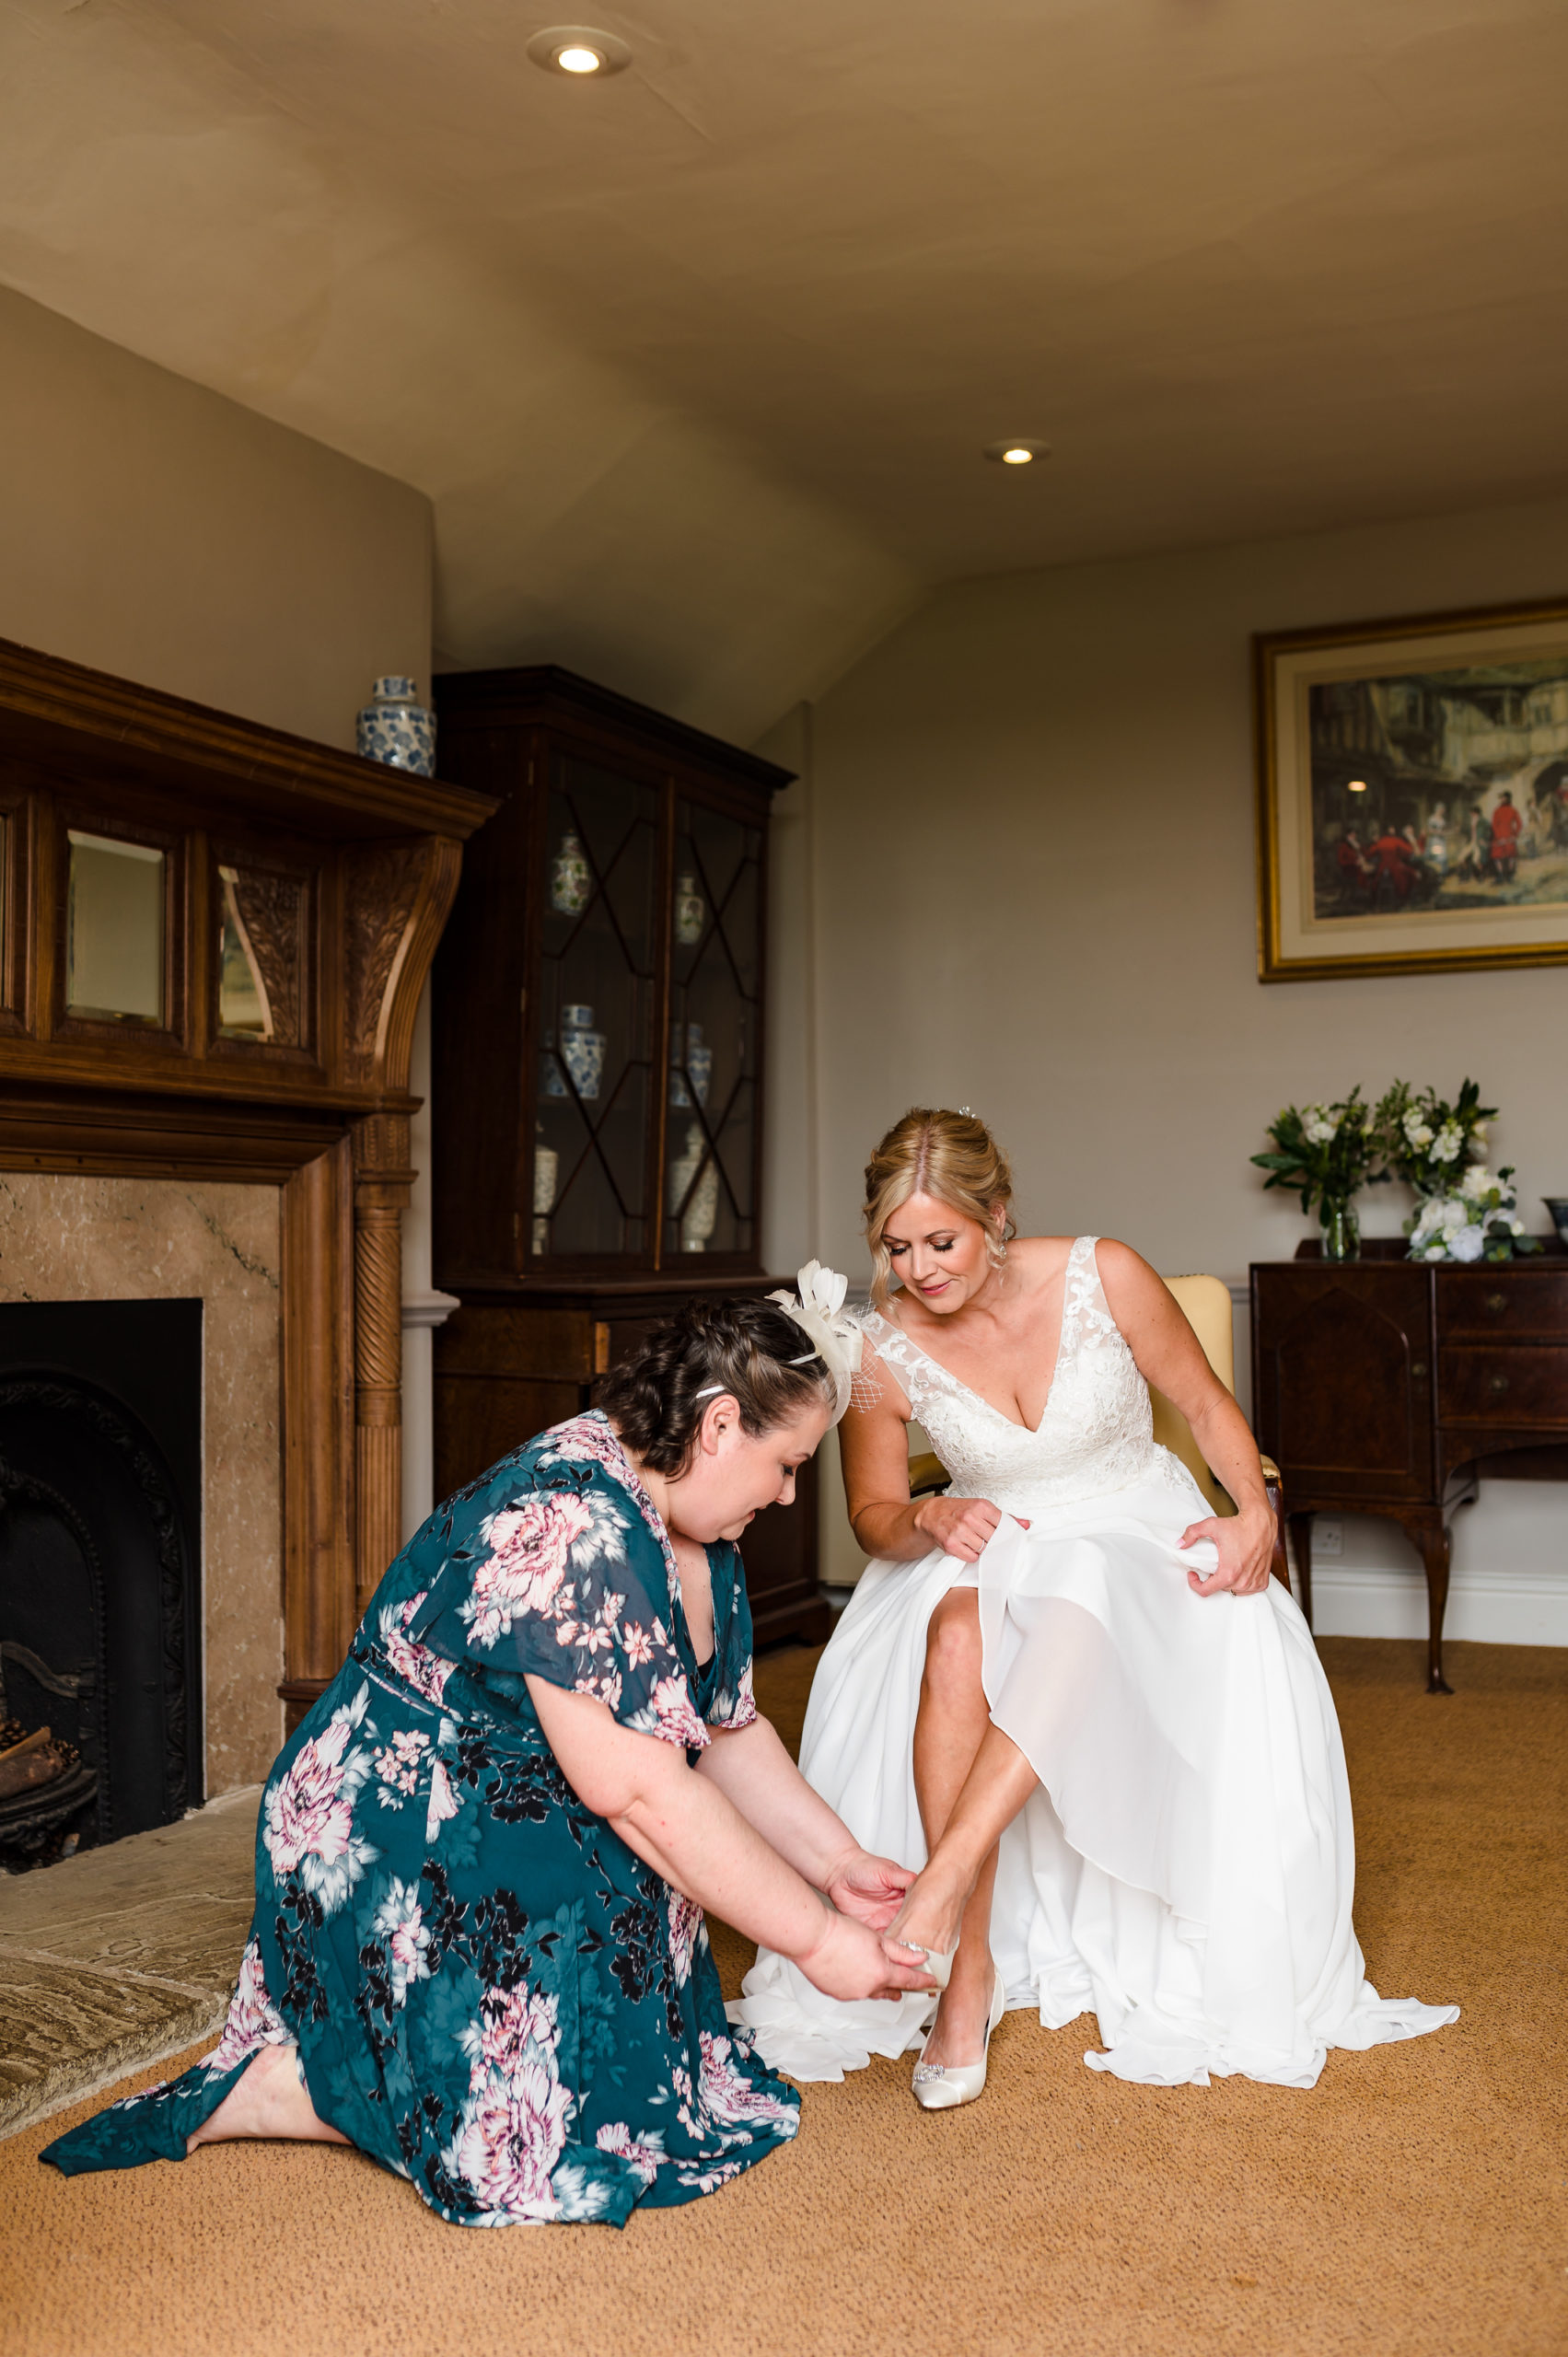 brides sister putting on her wedding shoes